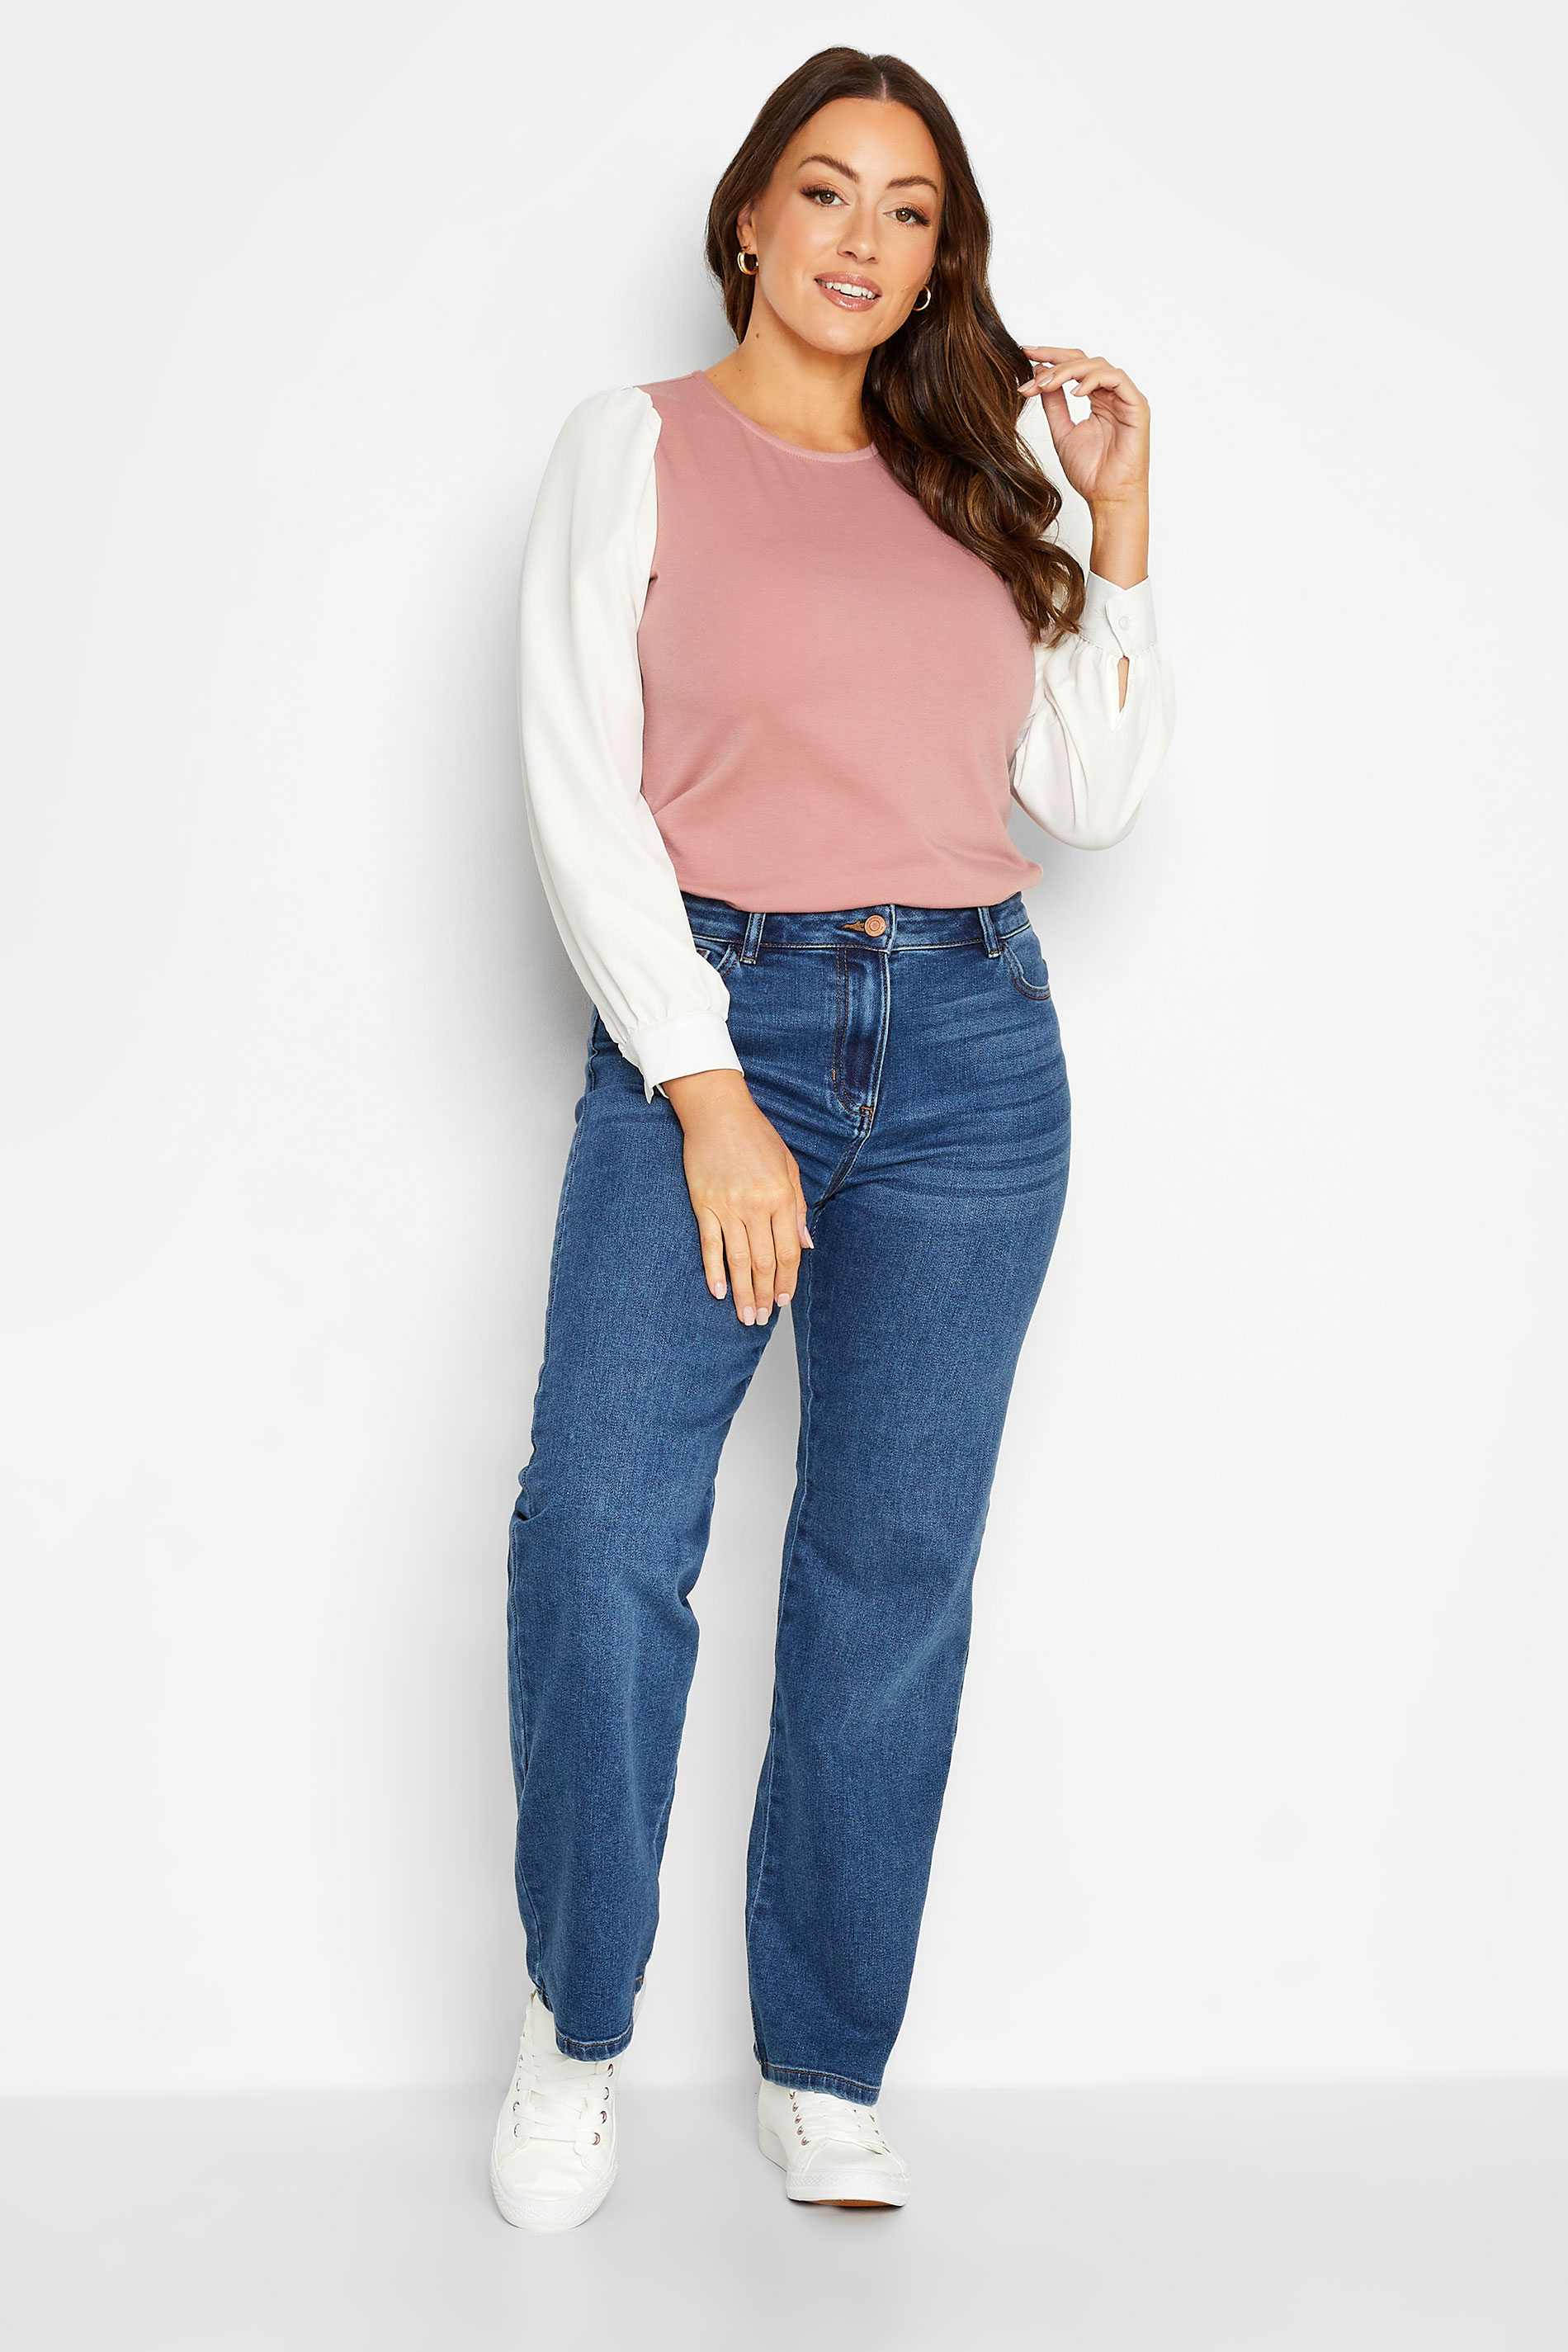 M&Co Pink Contrast Long Sleeve Top | M&Co 2